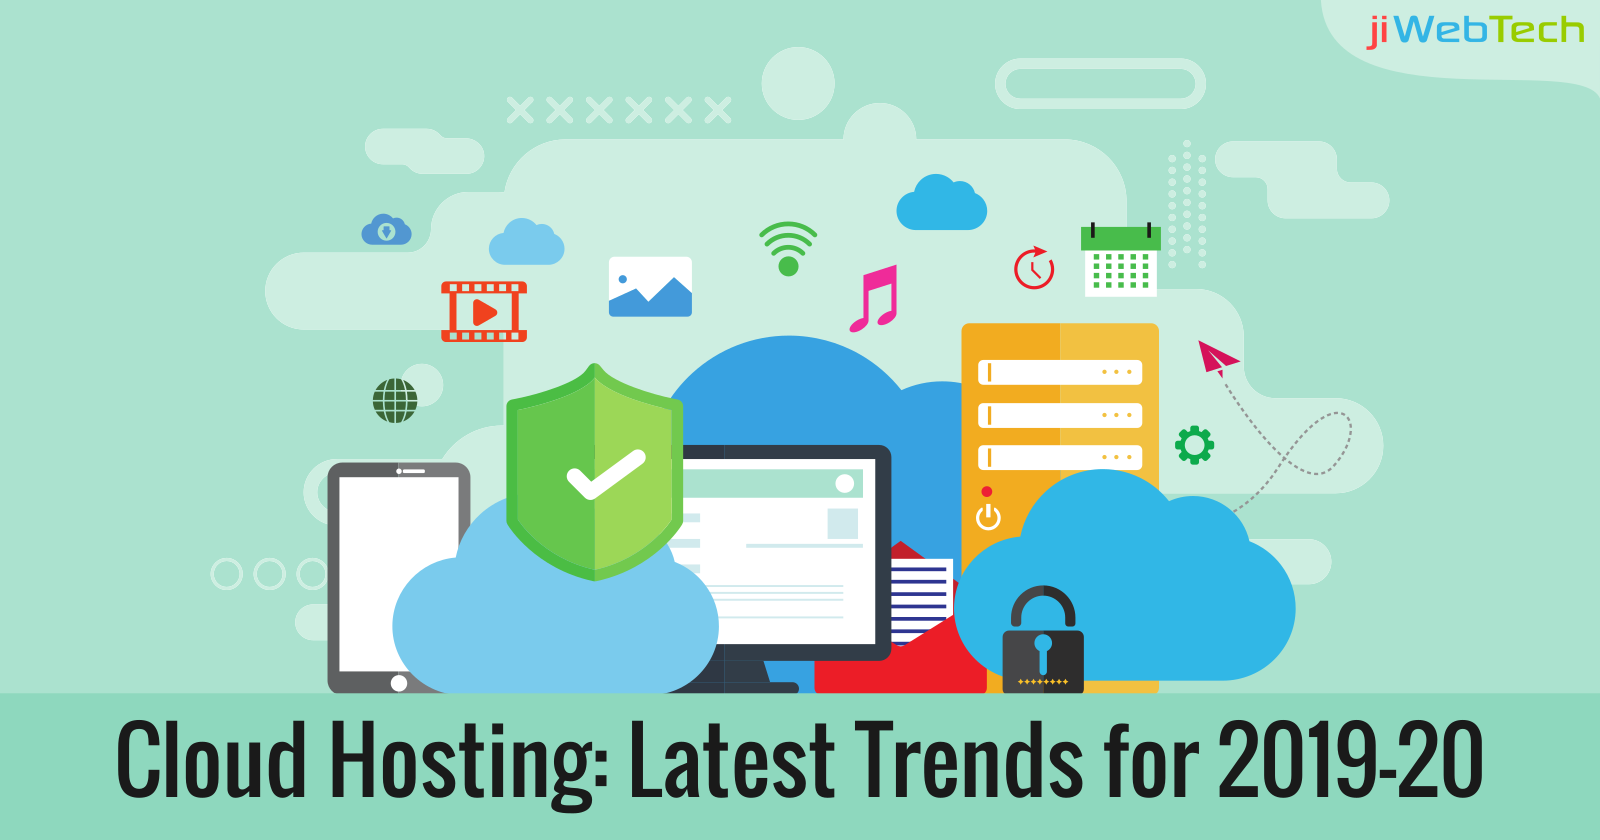 Cloud Hosting: Latest Trends for 2019-20